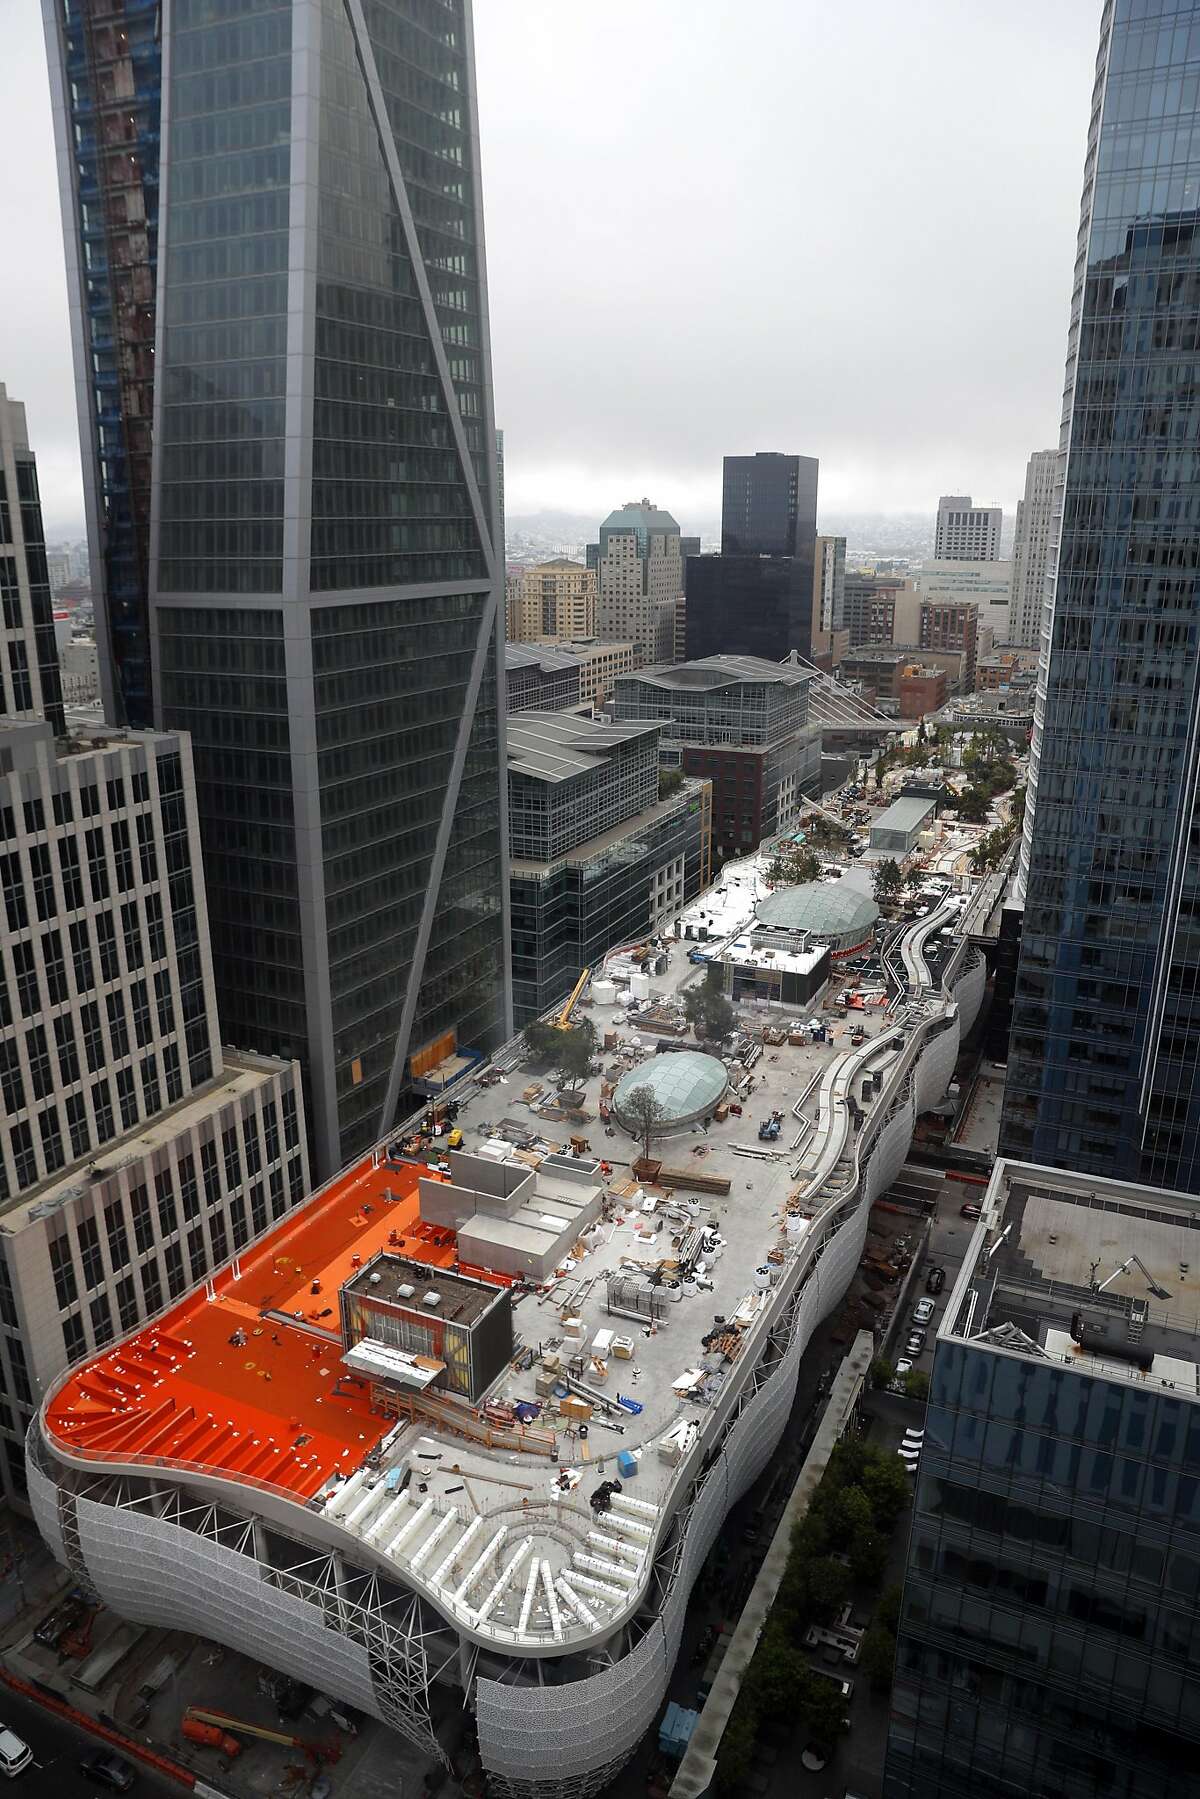 The view from above at the site of the new Transbay Terminal which is still under construction in San Francisco, on Wednesday, August 23, 2017.at the site of the new Transbay Terminal which is still under construction in San Francisco, on Wednesday, August 23, 2017.